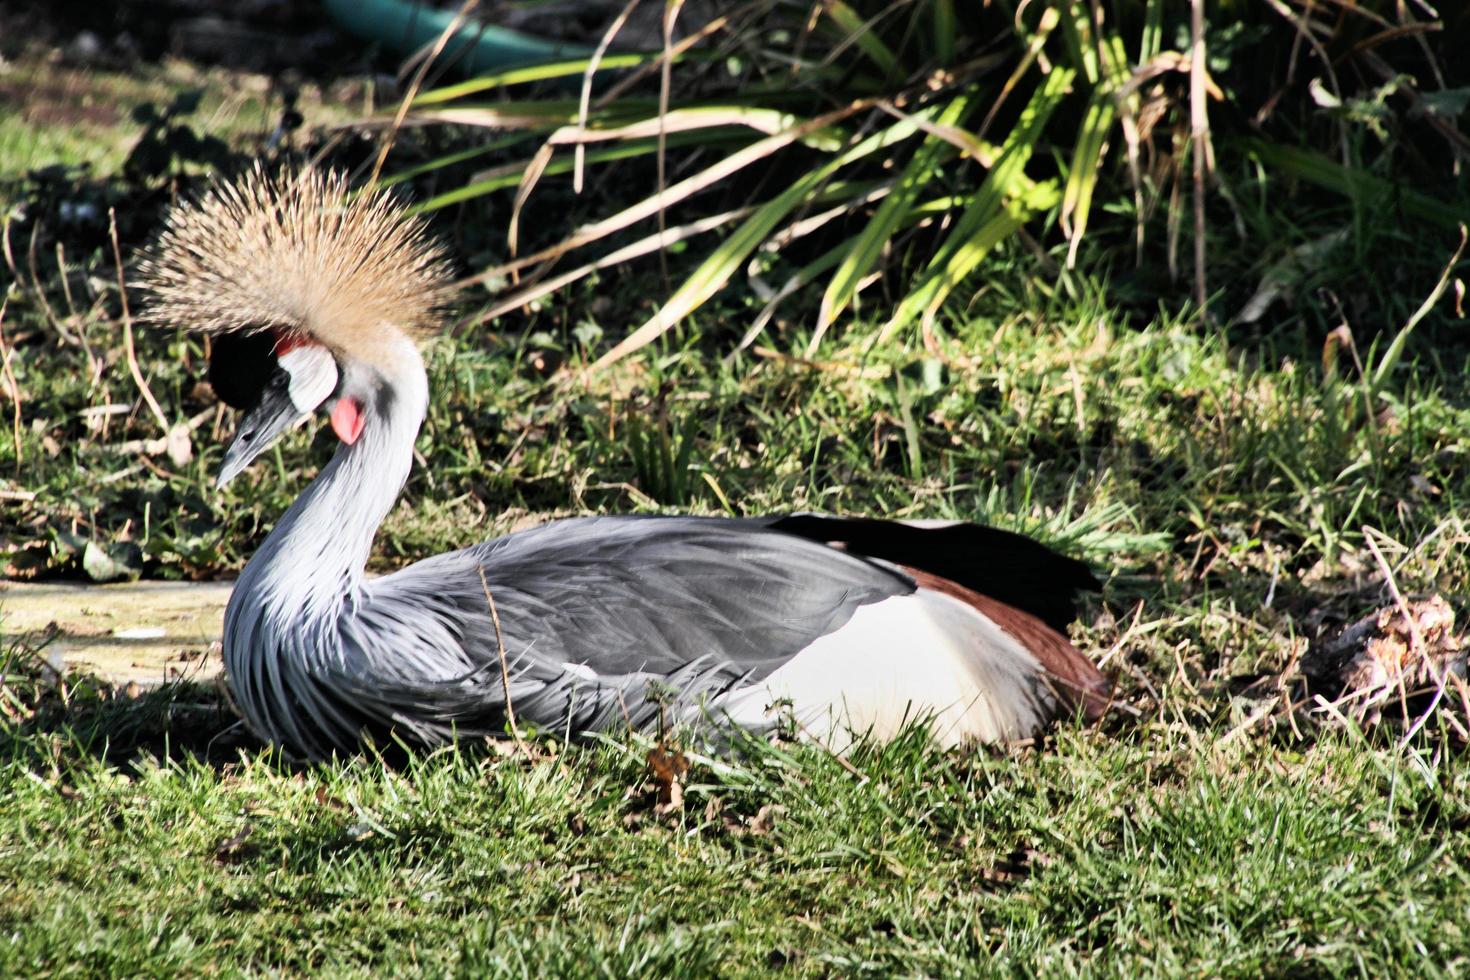 A view of a Crowned Crane photo